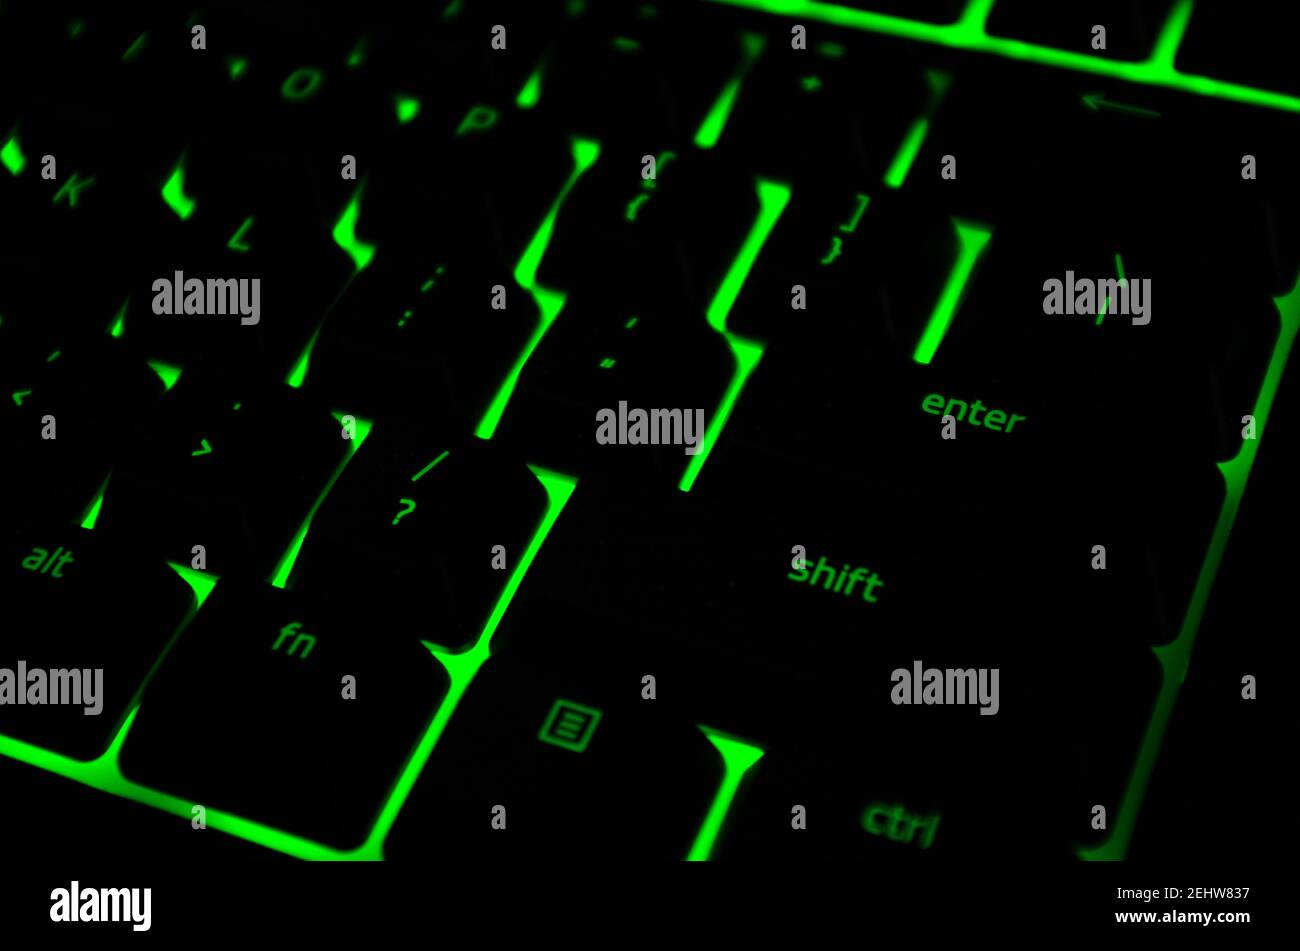 Modern green iluminated backlit keyboard. Green backlight, backlit on keyborad computer of gaming in the dark. Cyber Attack, hacking concept. Stock Photo